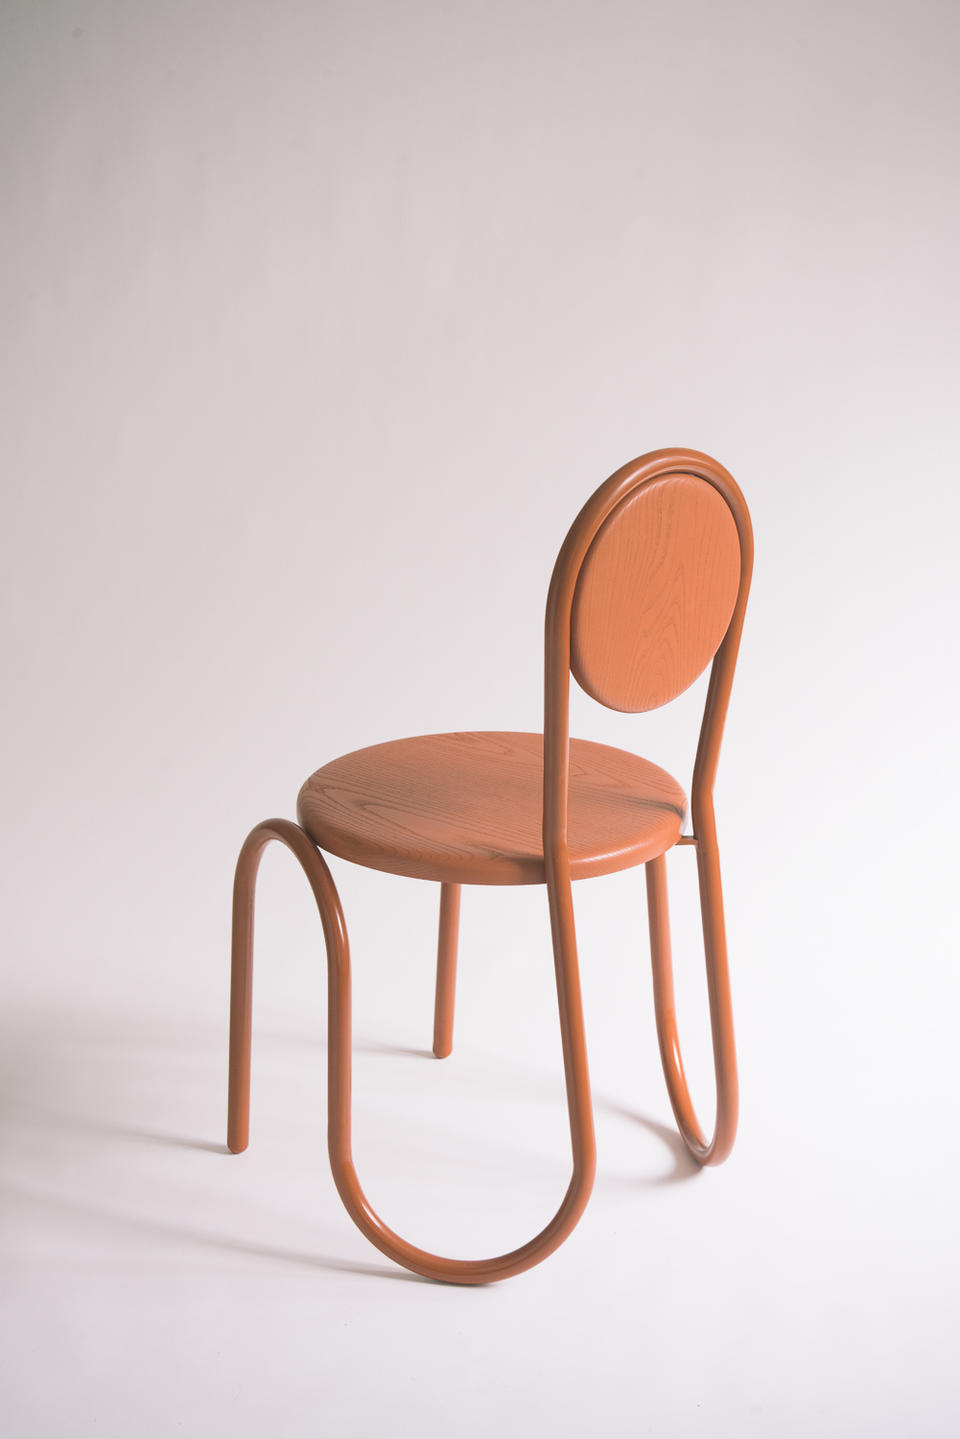 A brown wiggle steel tube chair frame with a wood circular seat and back.